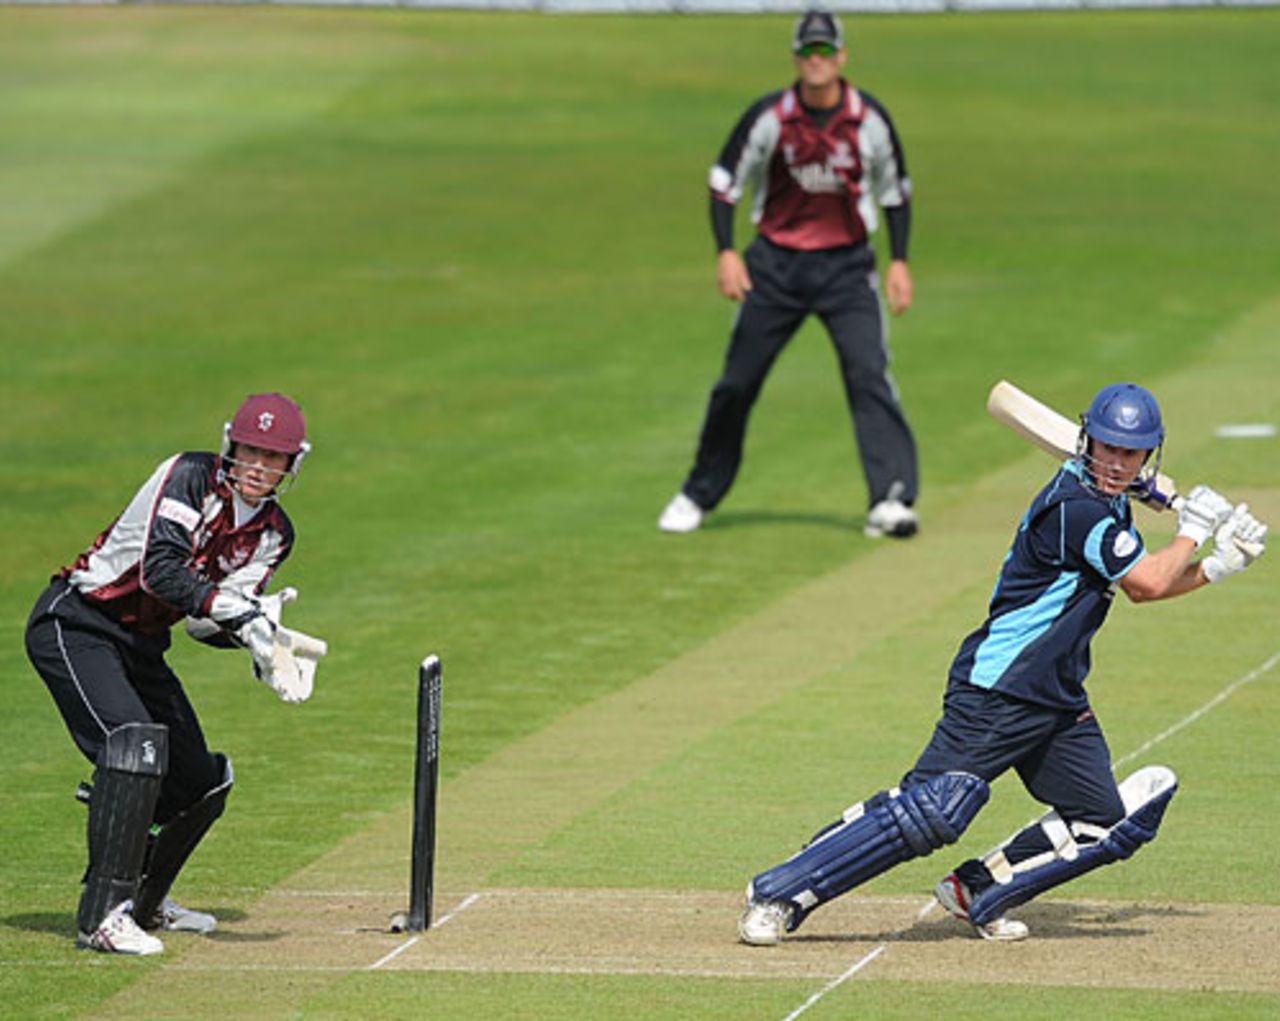 Murray Goodwin helped push Sussex up to 291 with a half century, Somerset v Sussex, Clydesdale Bank 40, Bristol, May 15, 2010